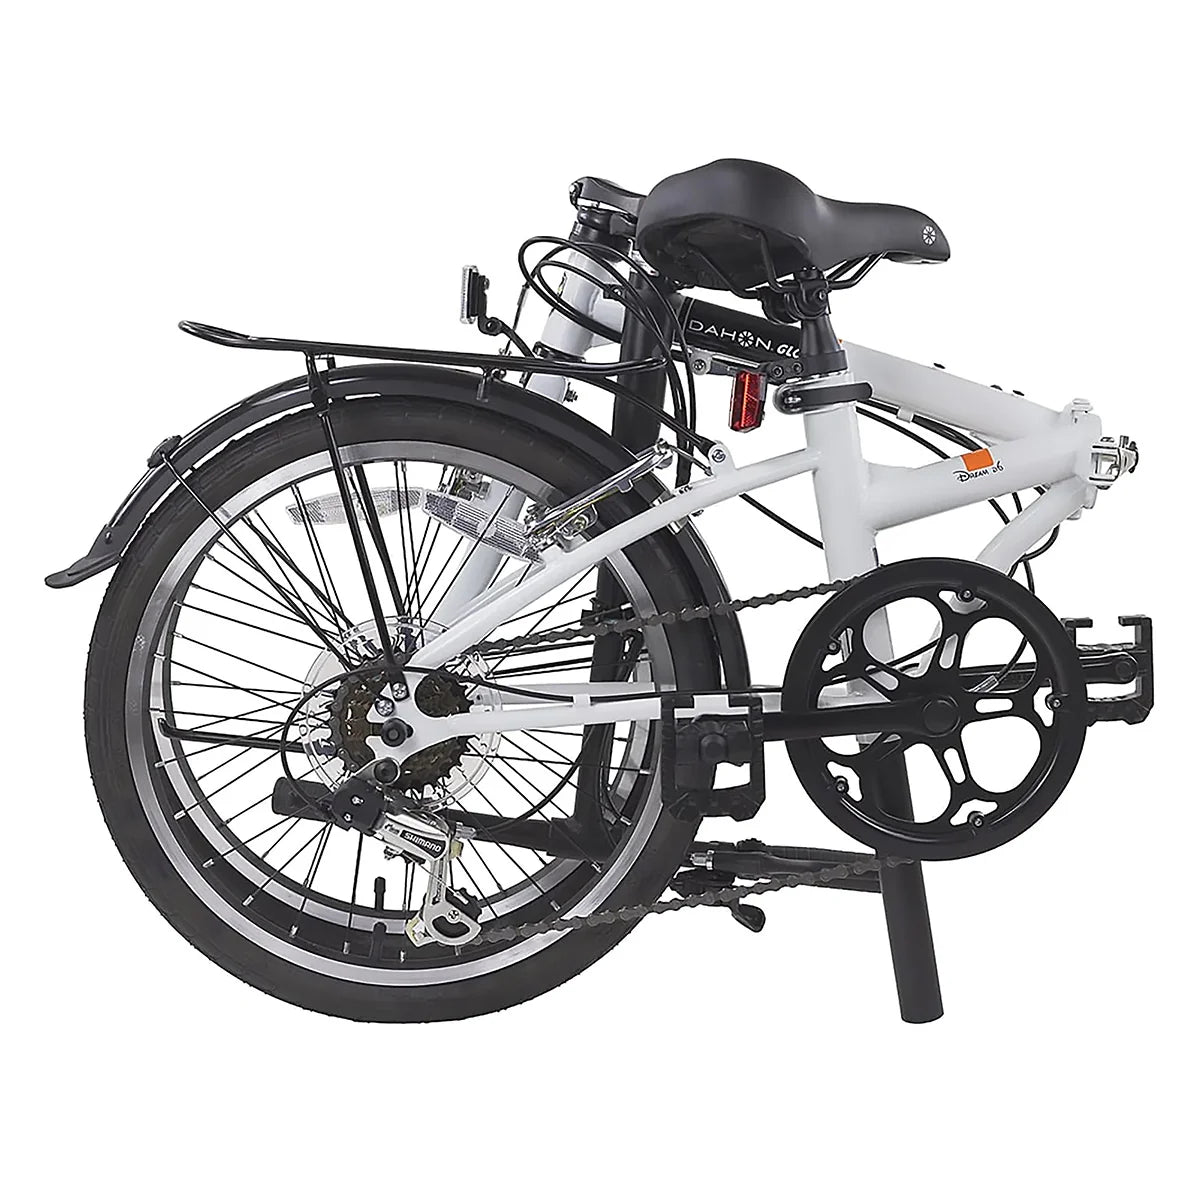 DAHON Dream D6 Deltech Cable System Weight Limit to 300lbs 